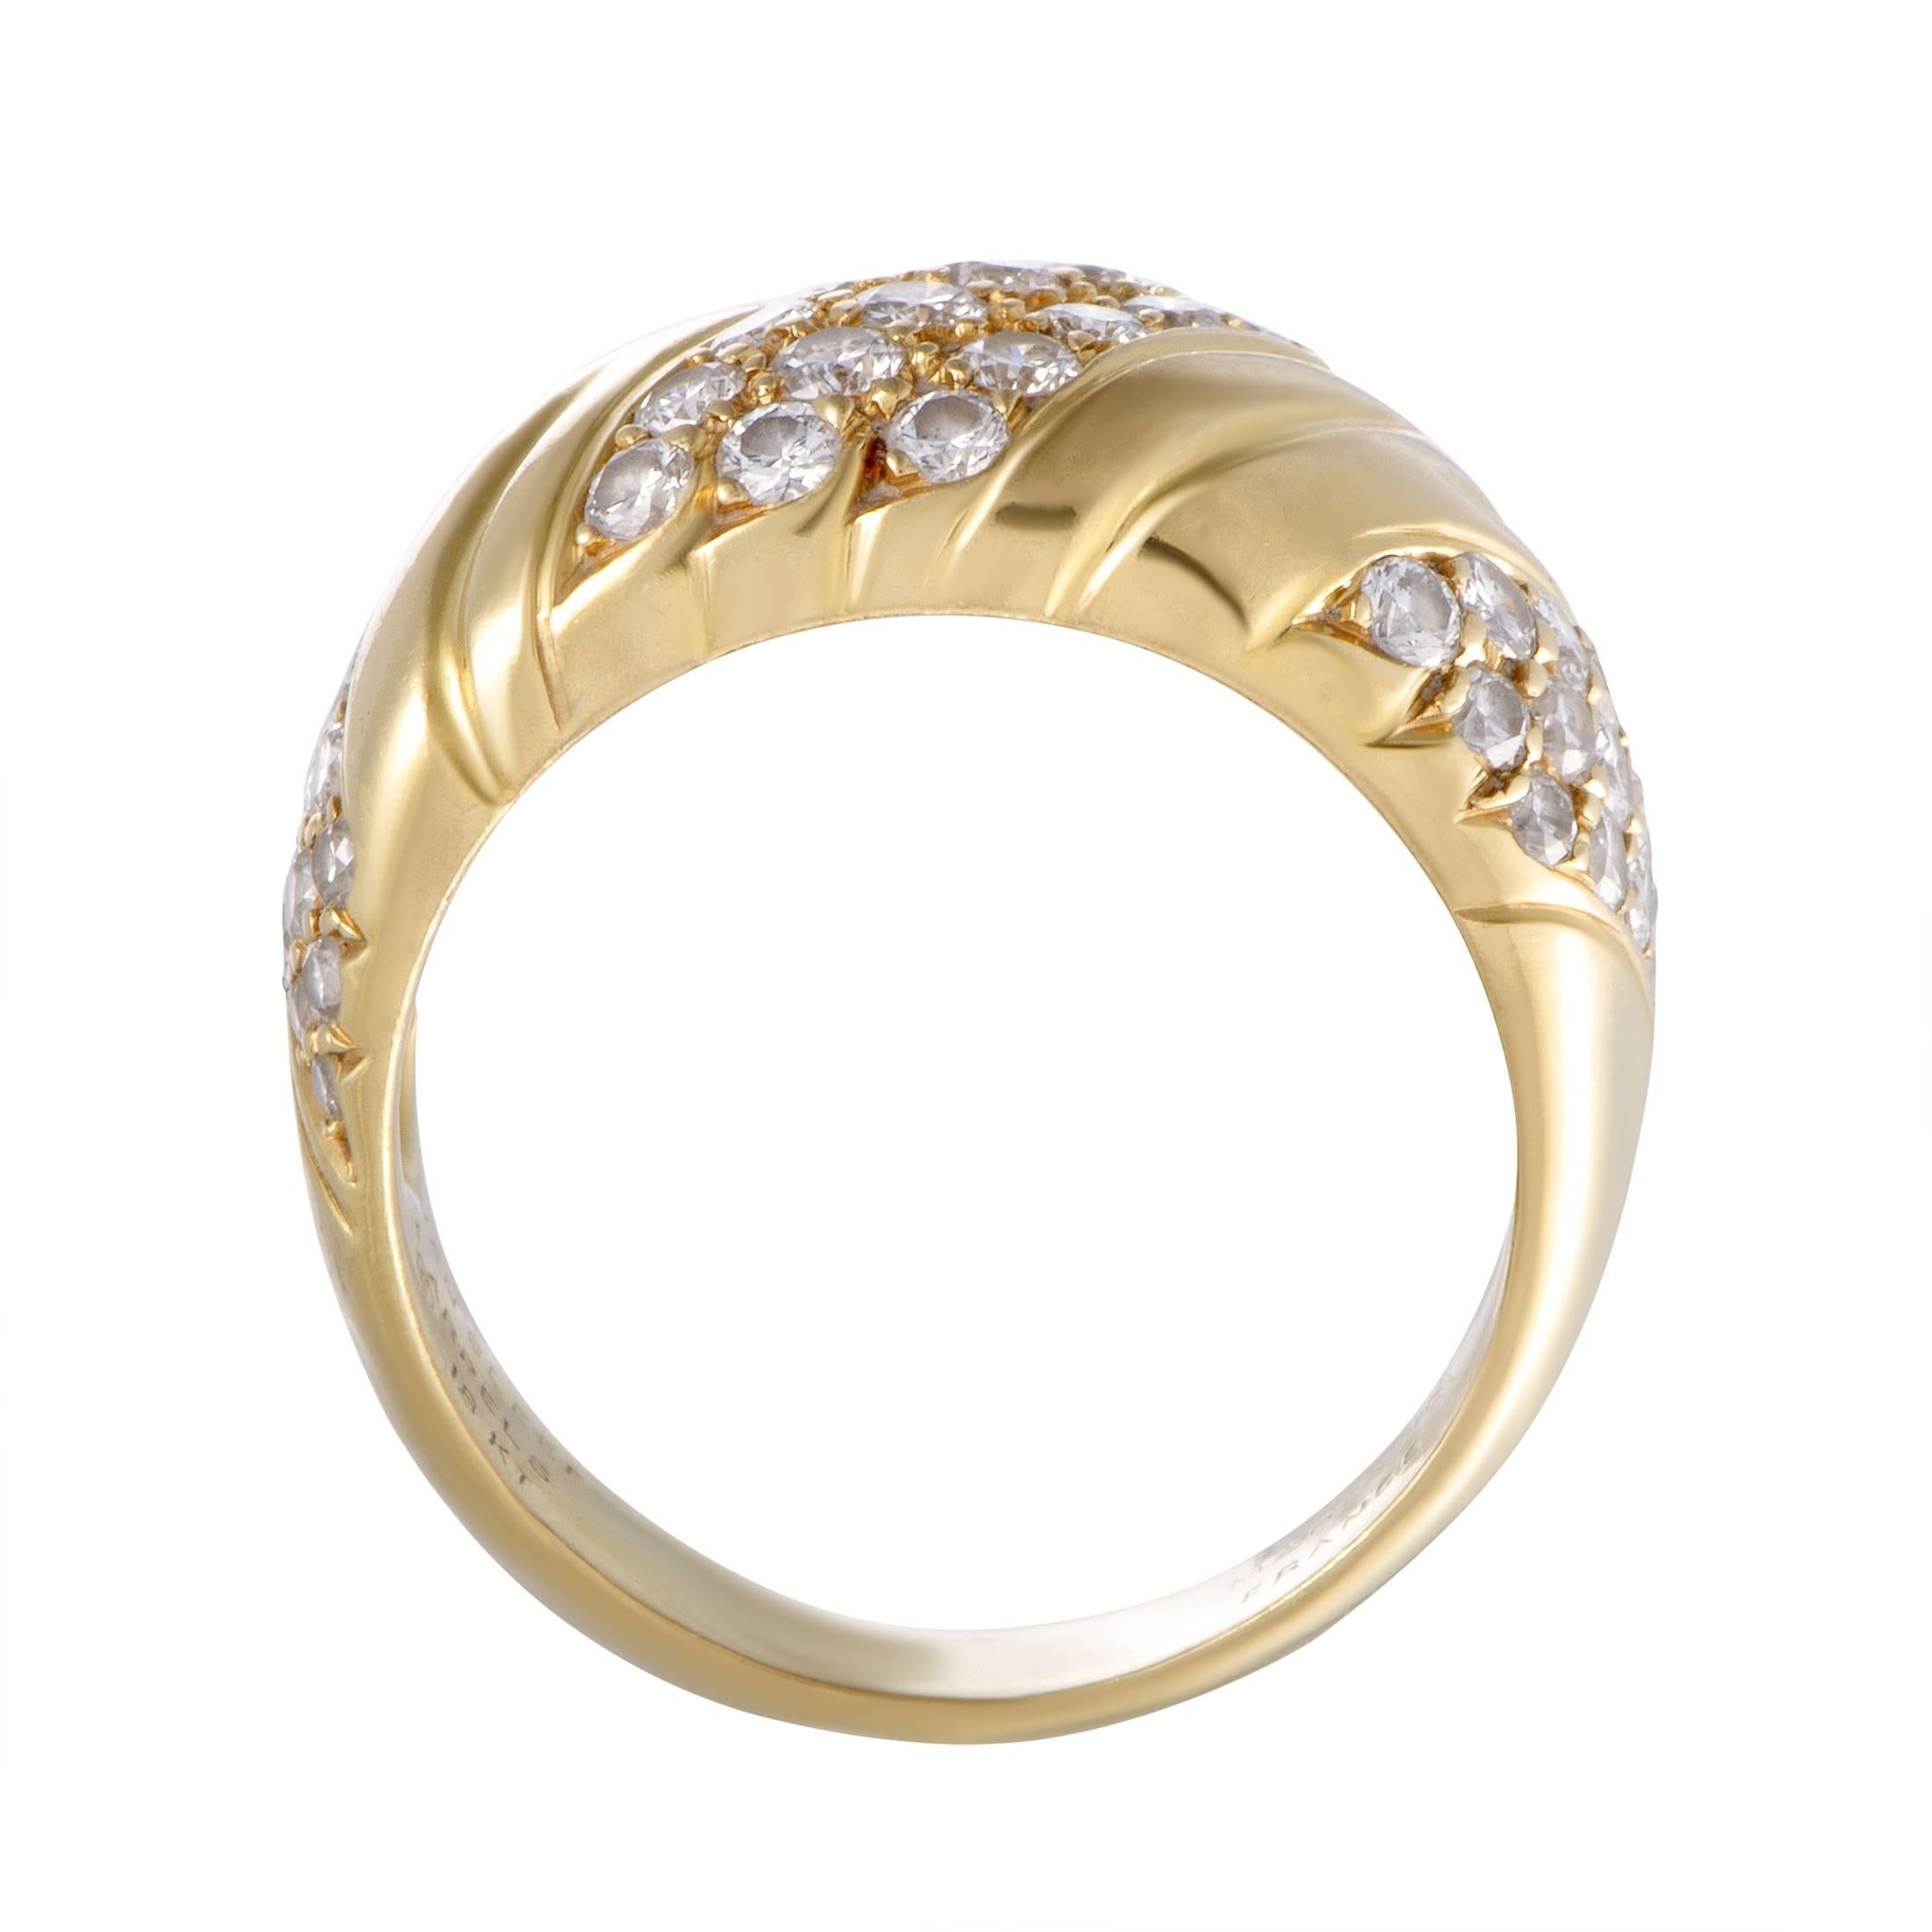 Exquisitely crafted from luxurious 18K yellow gold and beautifully decorated with scintillating diamonds, this gorgeous ring offers an incredibly sophisticated appearance. The ring is a Van Cleef & Arpels design and boasts a total of 1.25 carats of